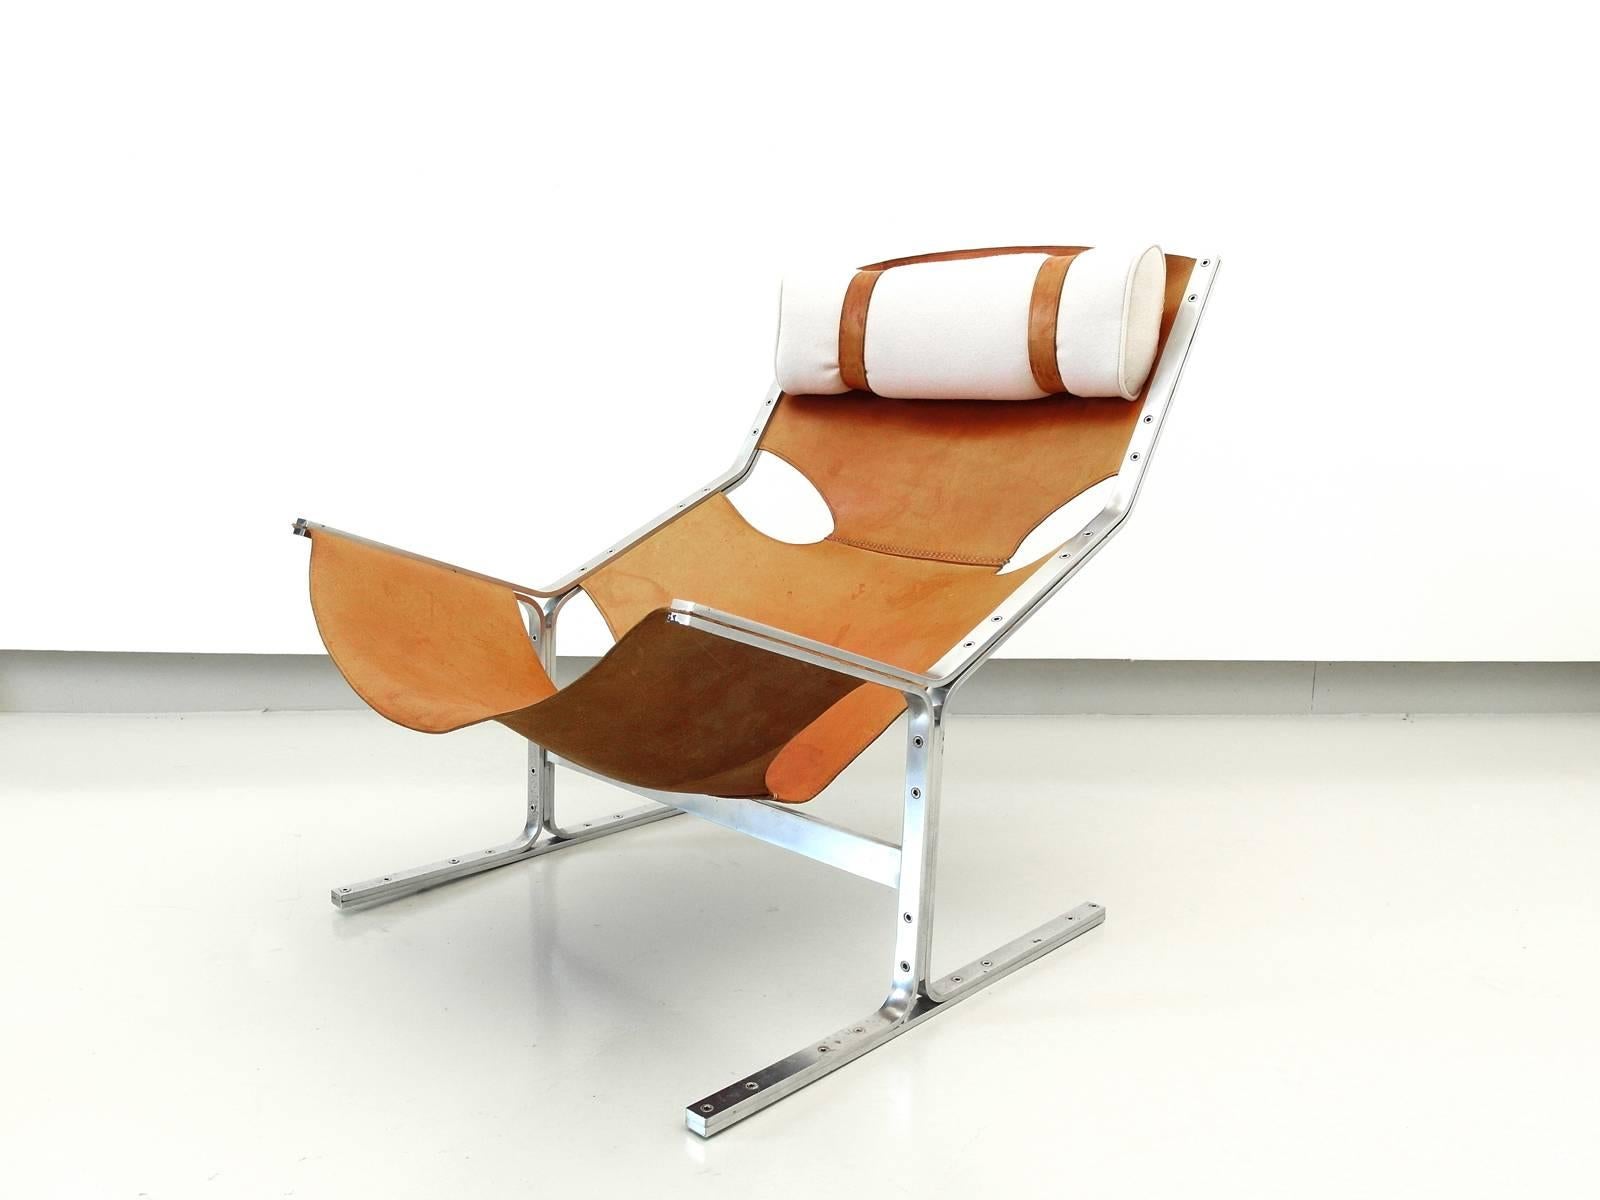 This iconic and rare lounge chair is a remarkable example of modernist Dutch furniture design from the 1950s.
The chair is attributed to Hein Salomonson a Dutch designer from the Gerrit Rietveld era. It was manufactured by AP Originals, Abraham